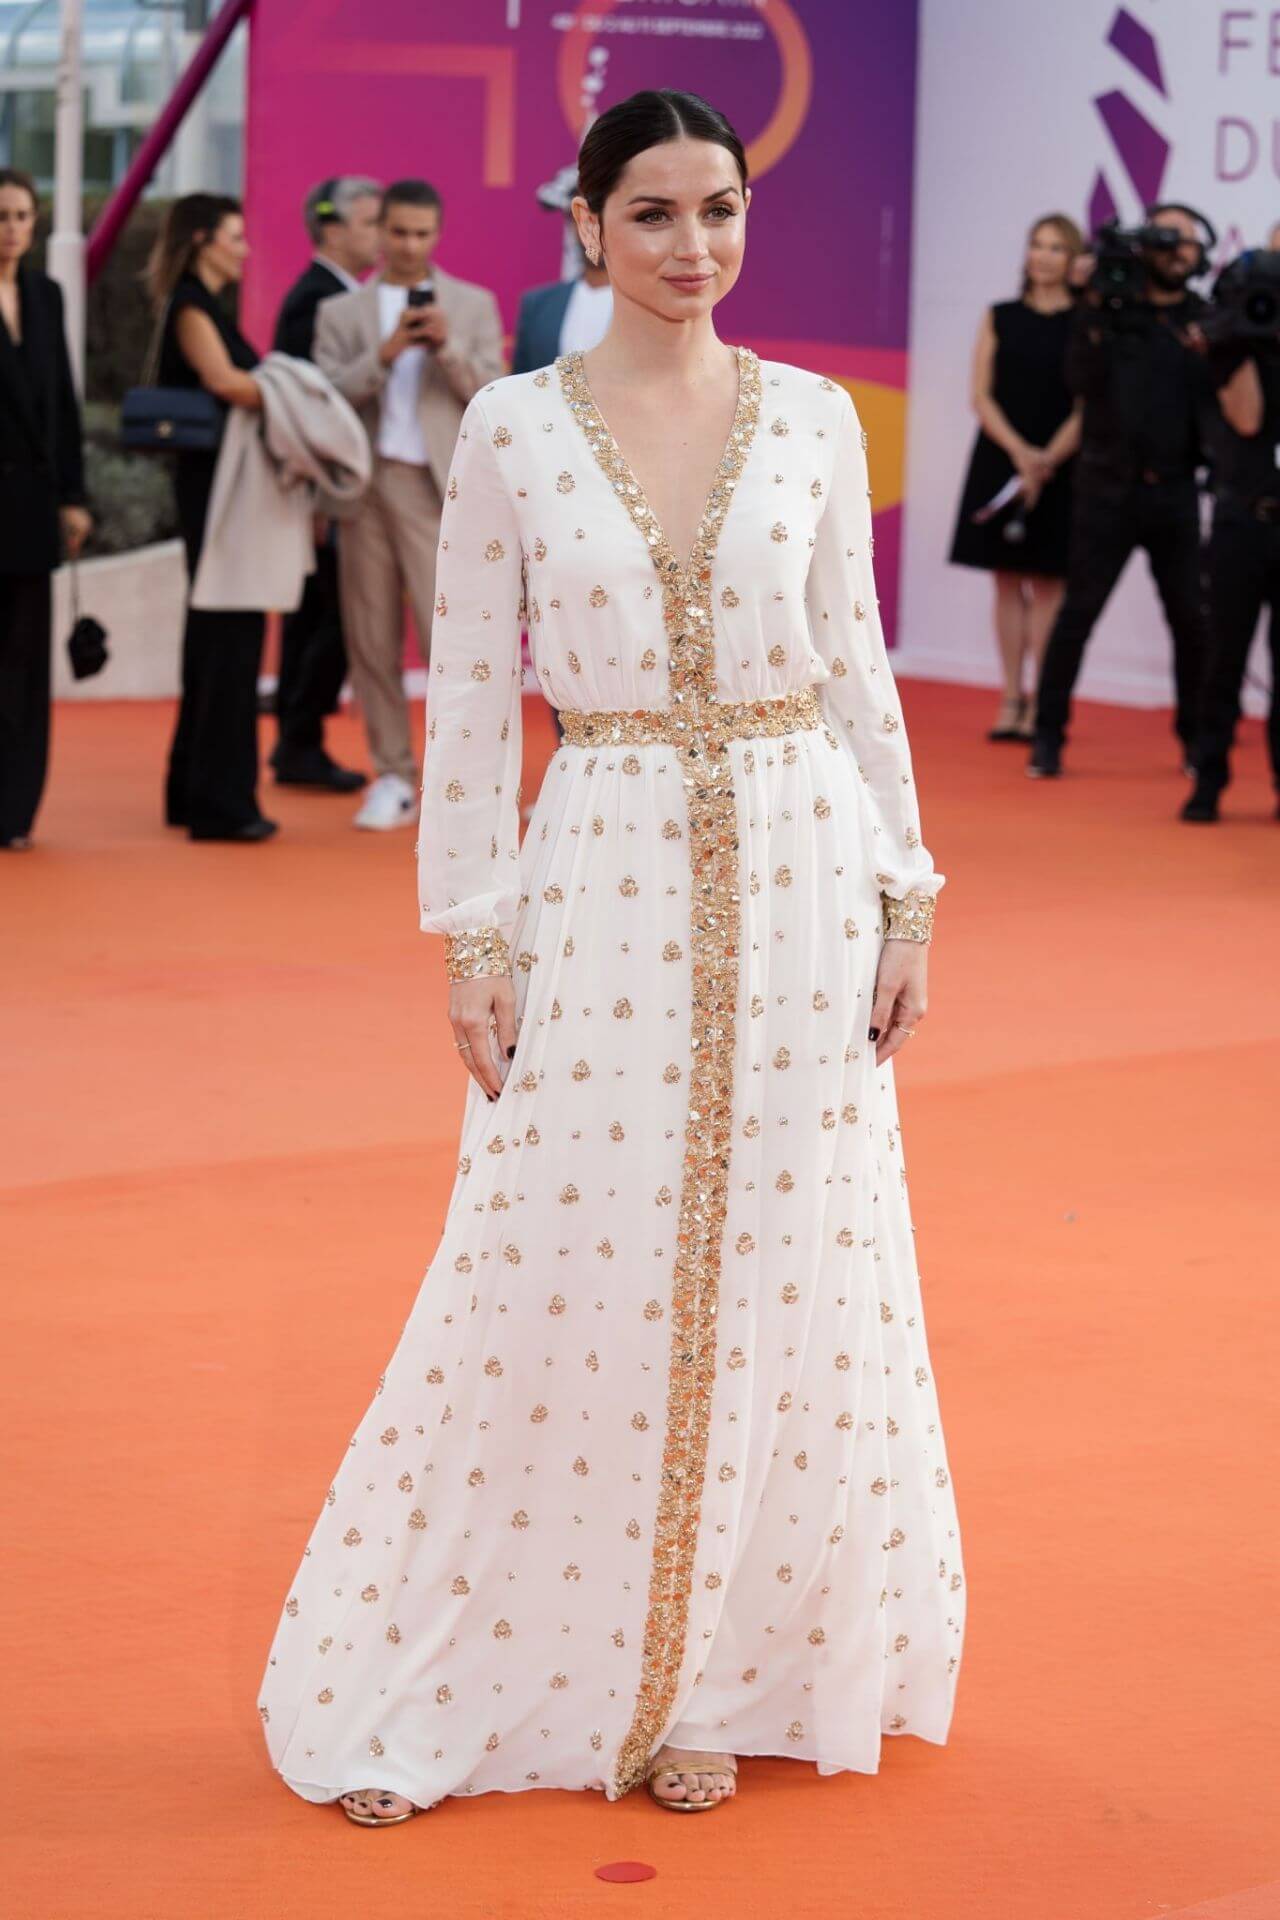 Ana de Armas In White V Neck Full Sleeves Stone Work Embroidery Long Gown At“Blonde” Premiere at Deauville American Film Festival